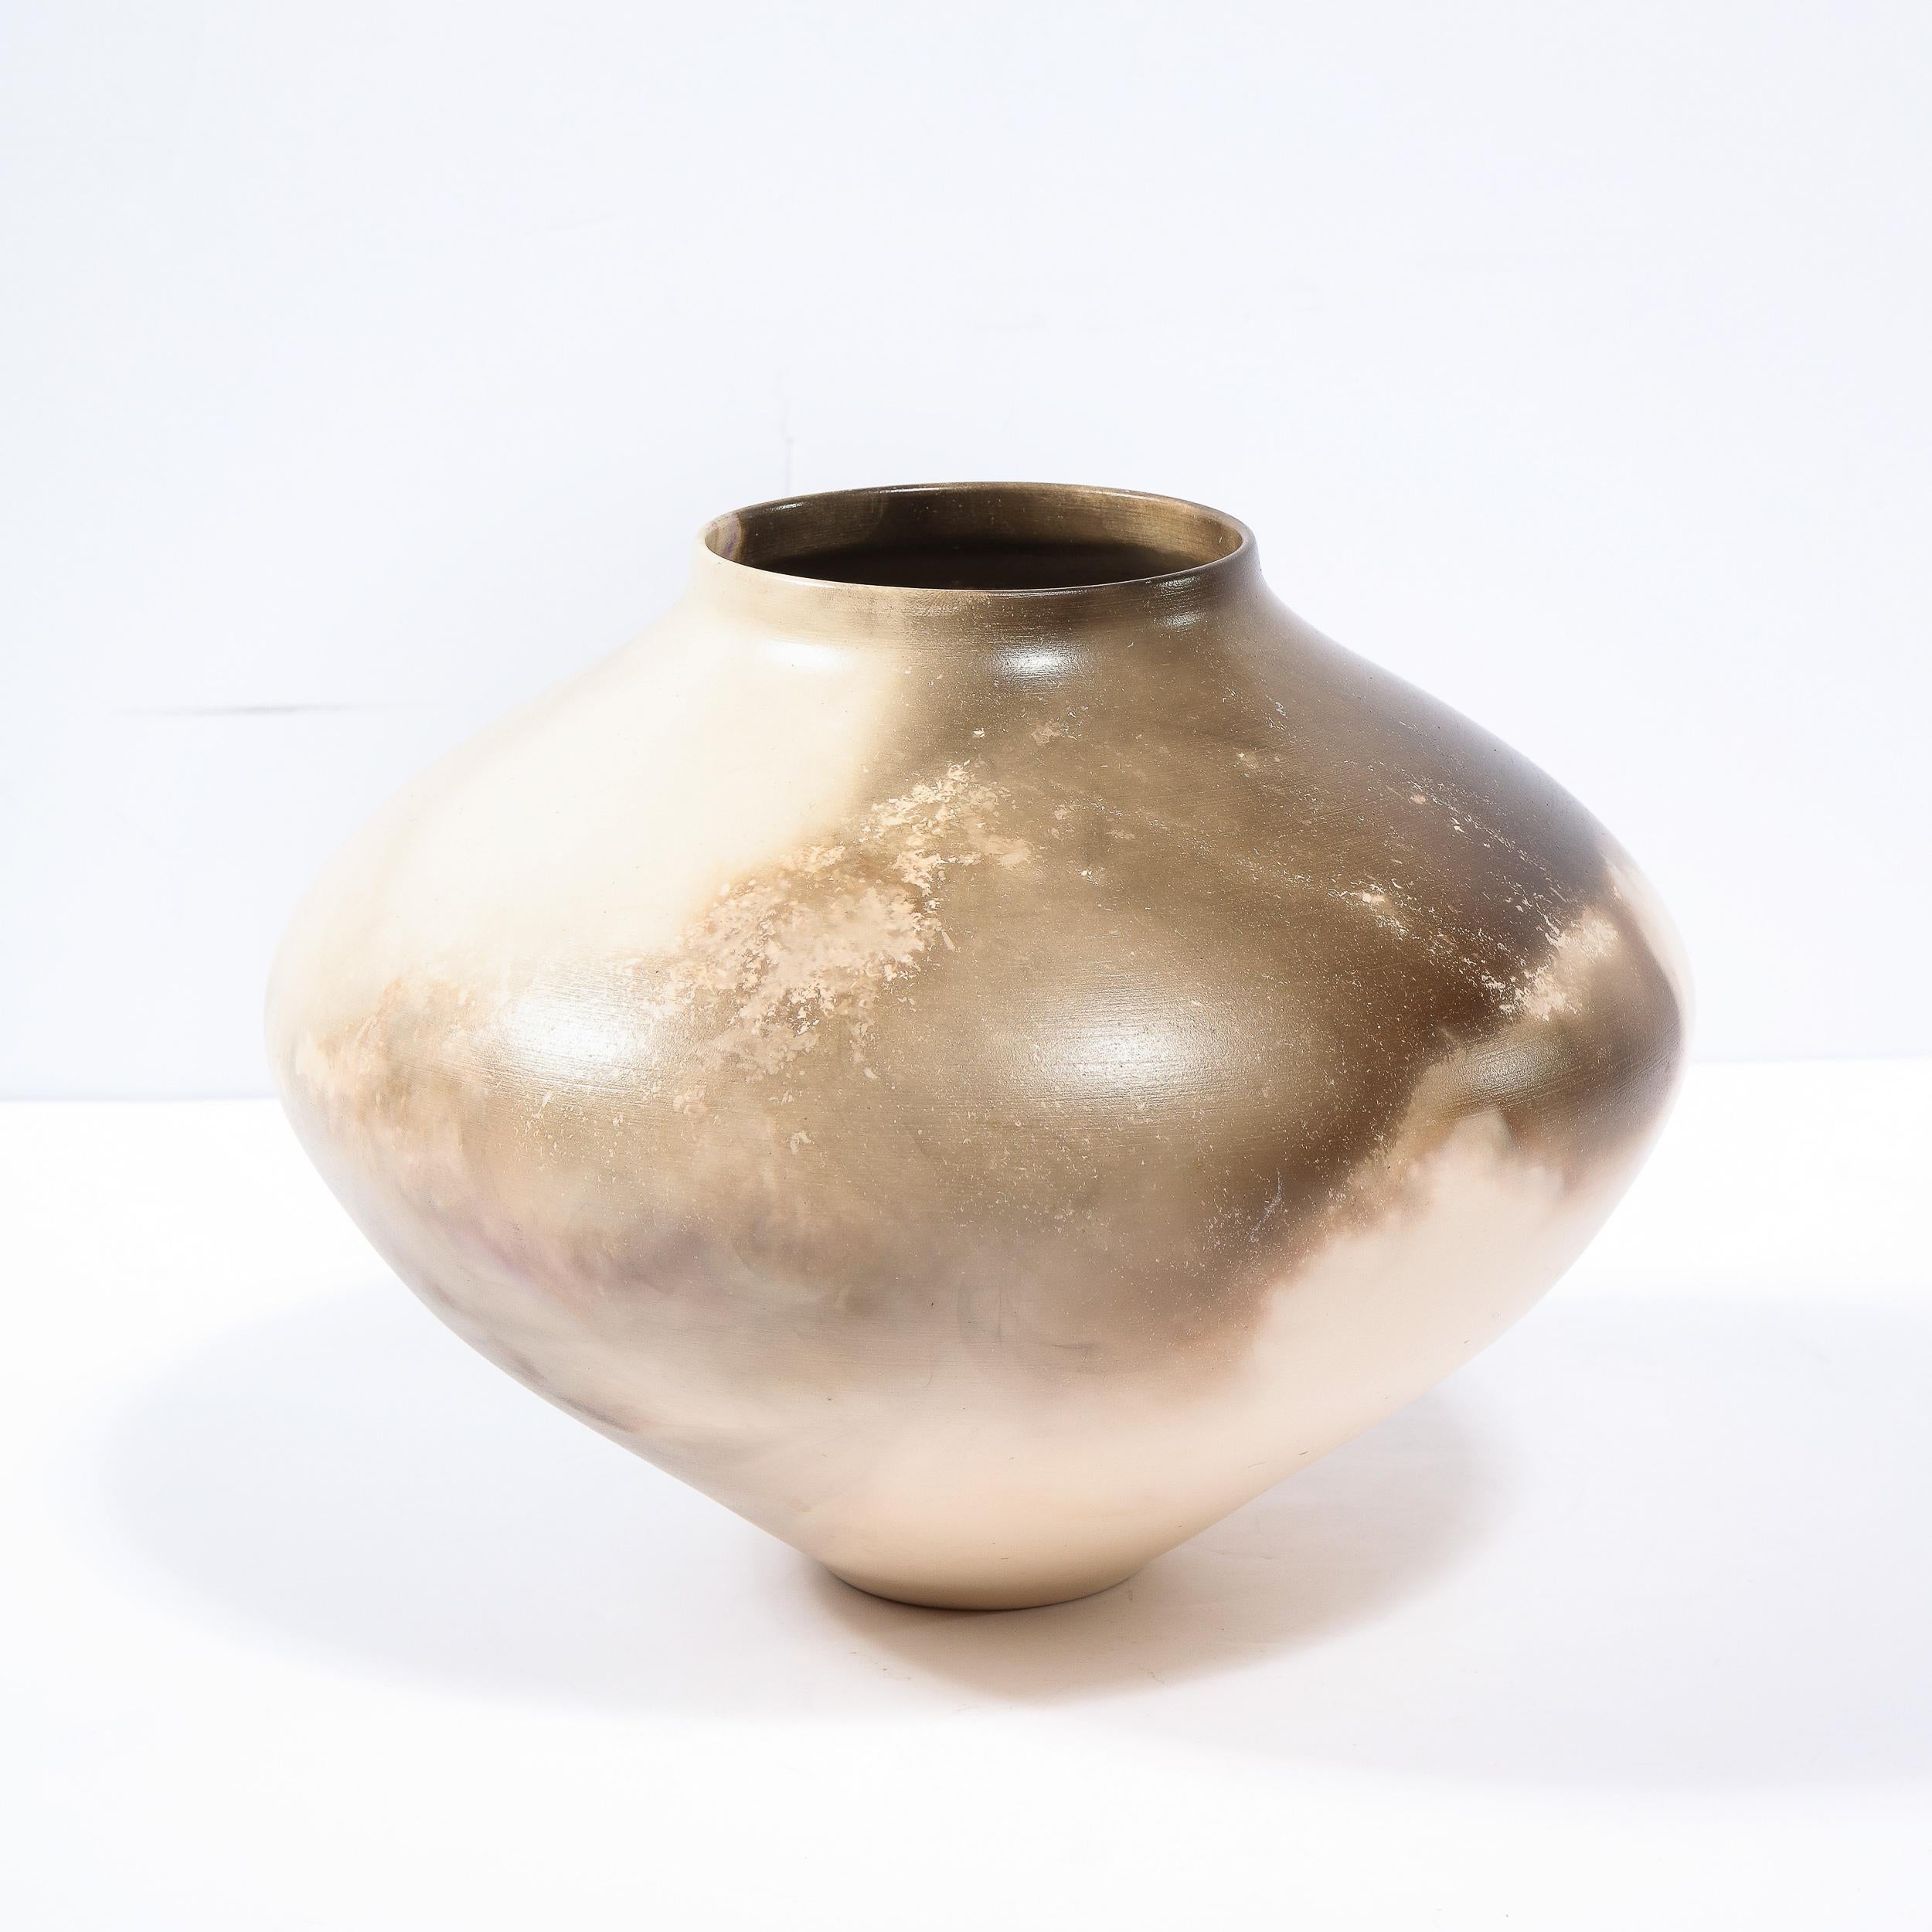 This elegant modernist vase was realized in the United States circa 1980. It features a conical form that flares dramatically at its shoulders before tapering to an economical circular mouth. The exterior of the piece has been hand glazed in java